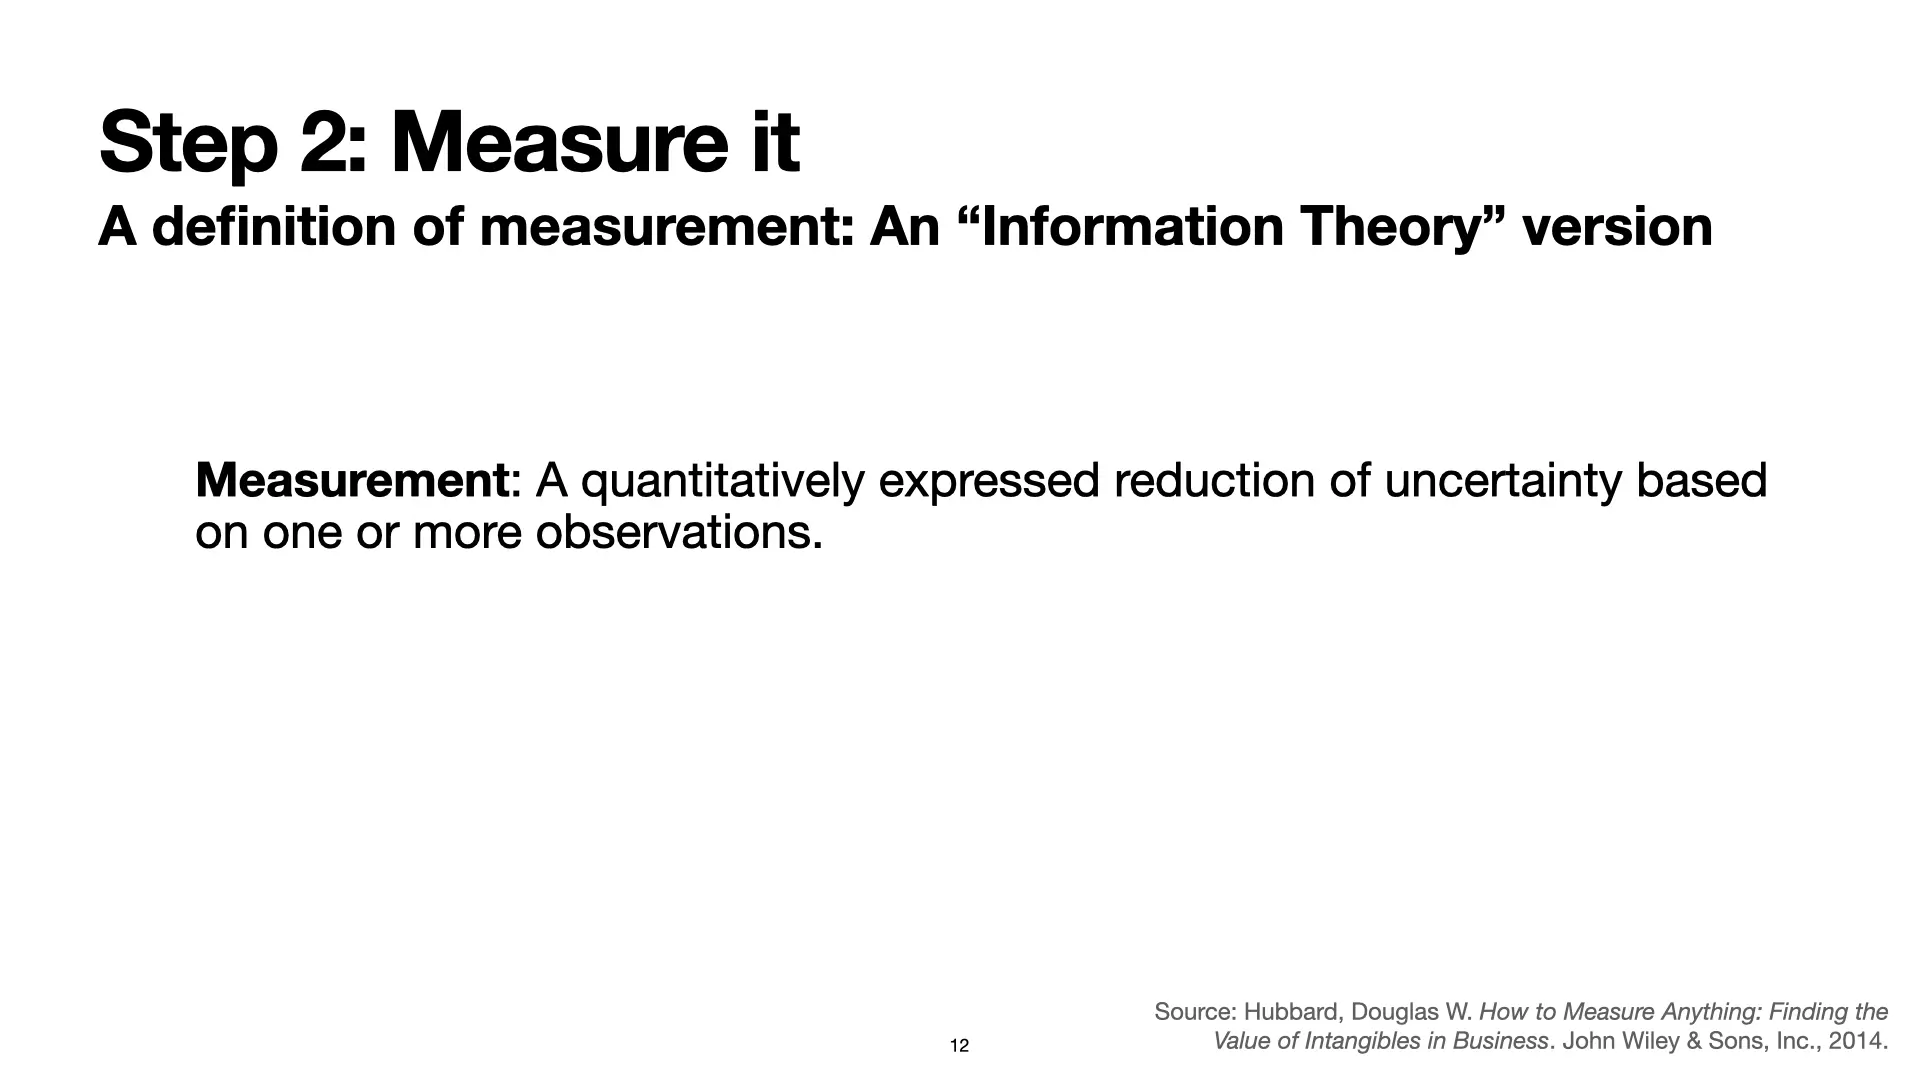 Slide 12: Step 2: Measure it: A definition of measurement: An 'Information Theory' version. Measurement: A quantitatively expressed reduction of uncertainty based on one or more observations. Source: Hubbard, Douglas W. How to Measure Anything: Finding the Value of Intangibles in Business. John Wiley & Sons, Inc., 2014.